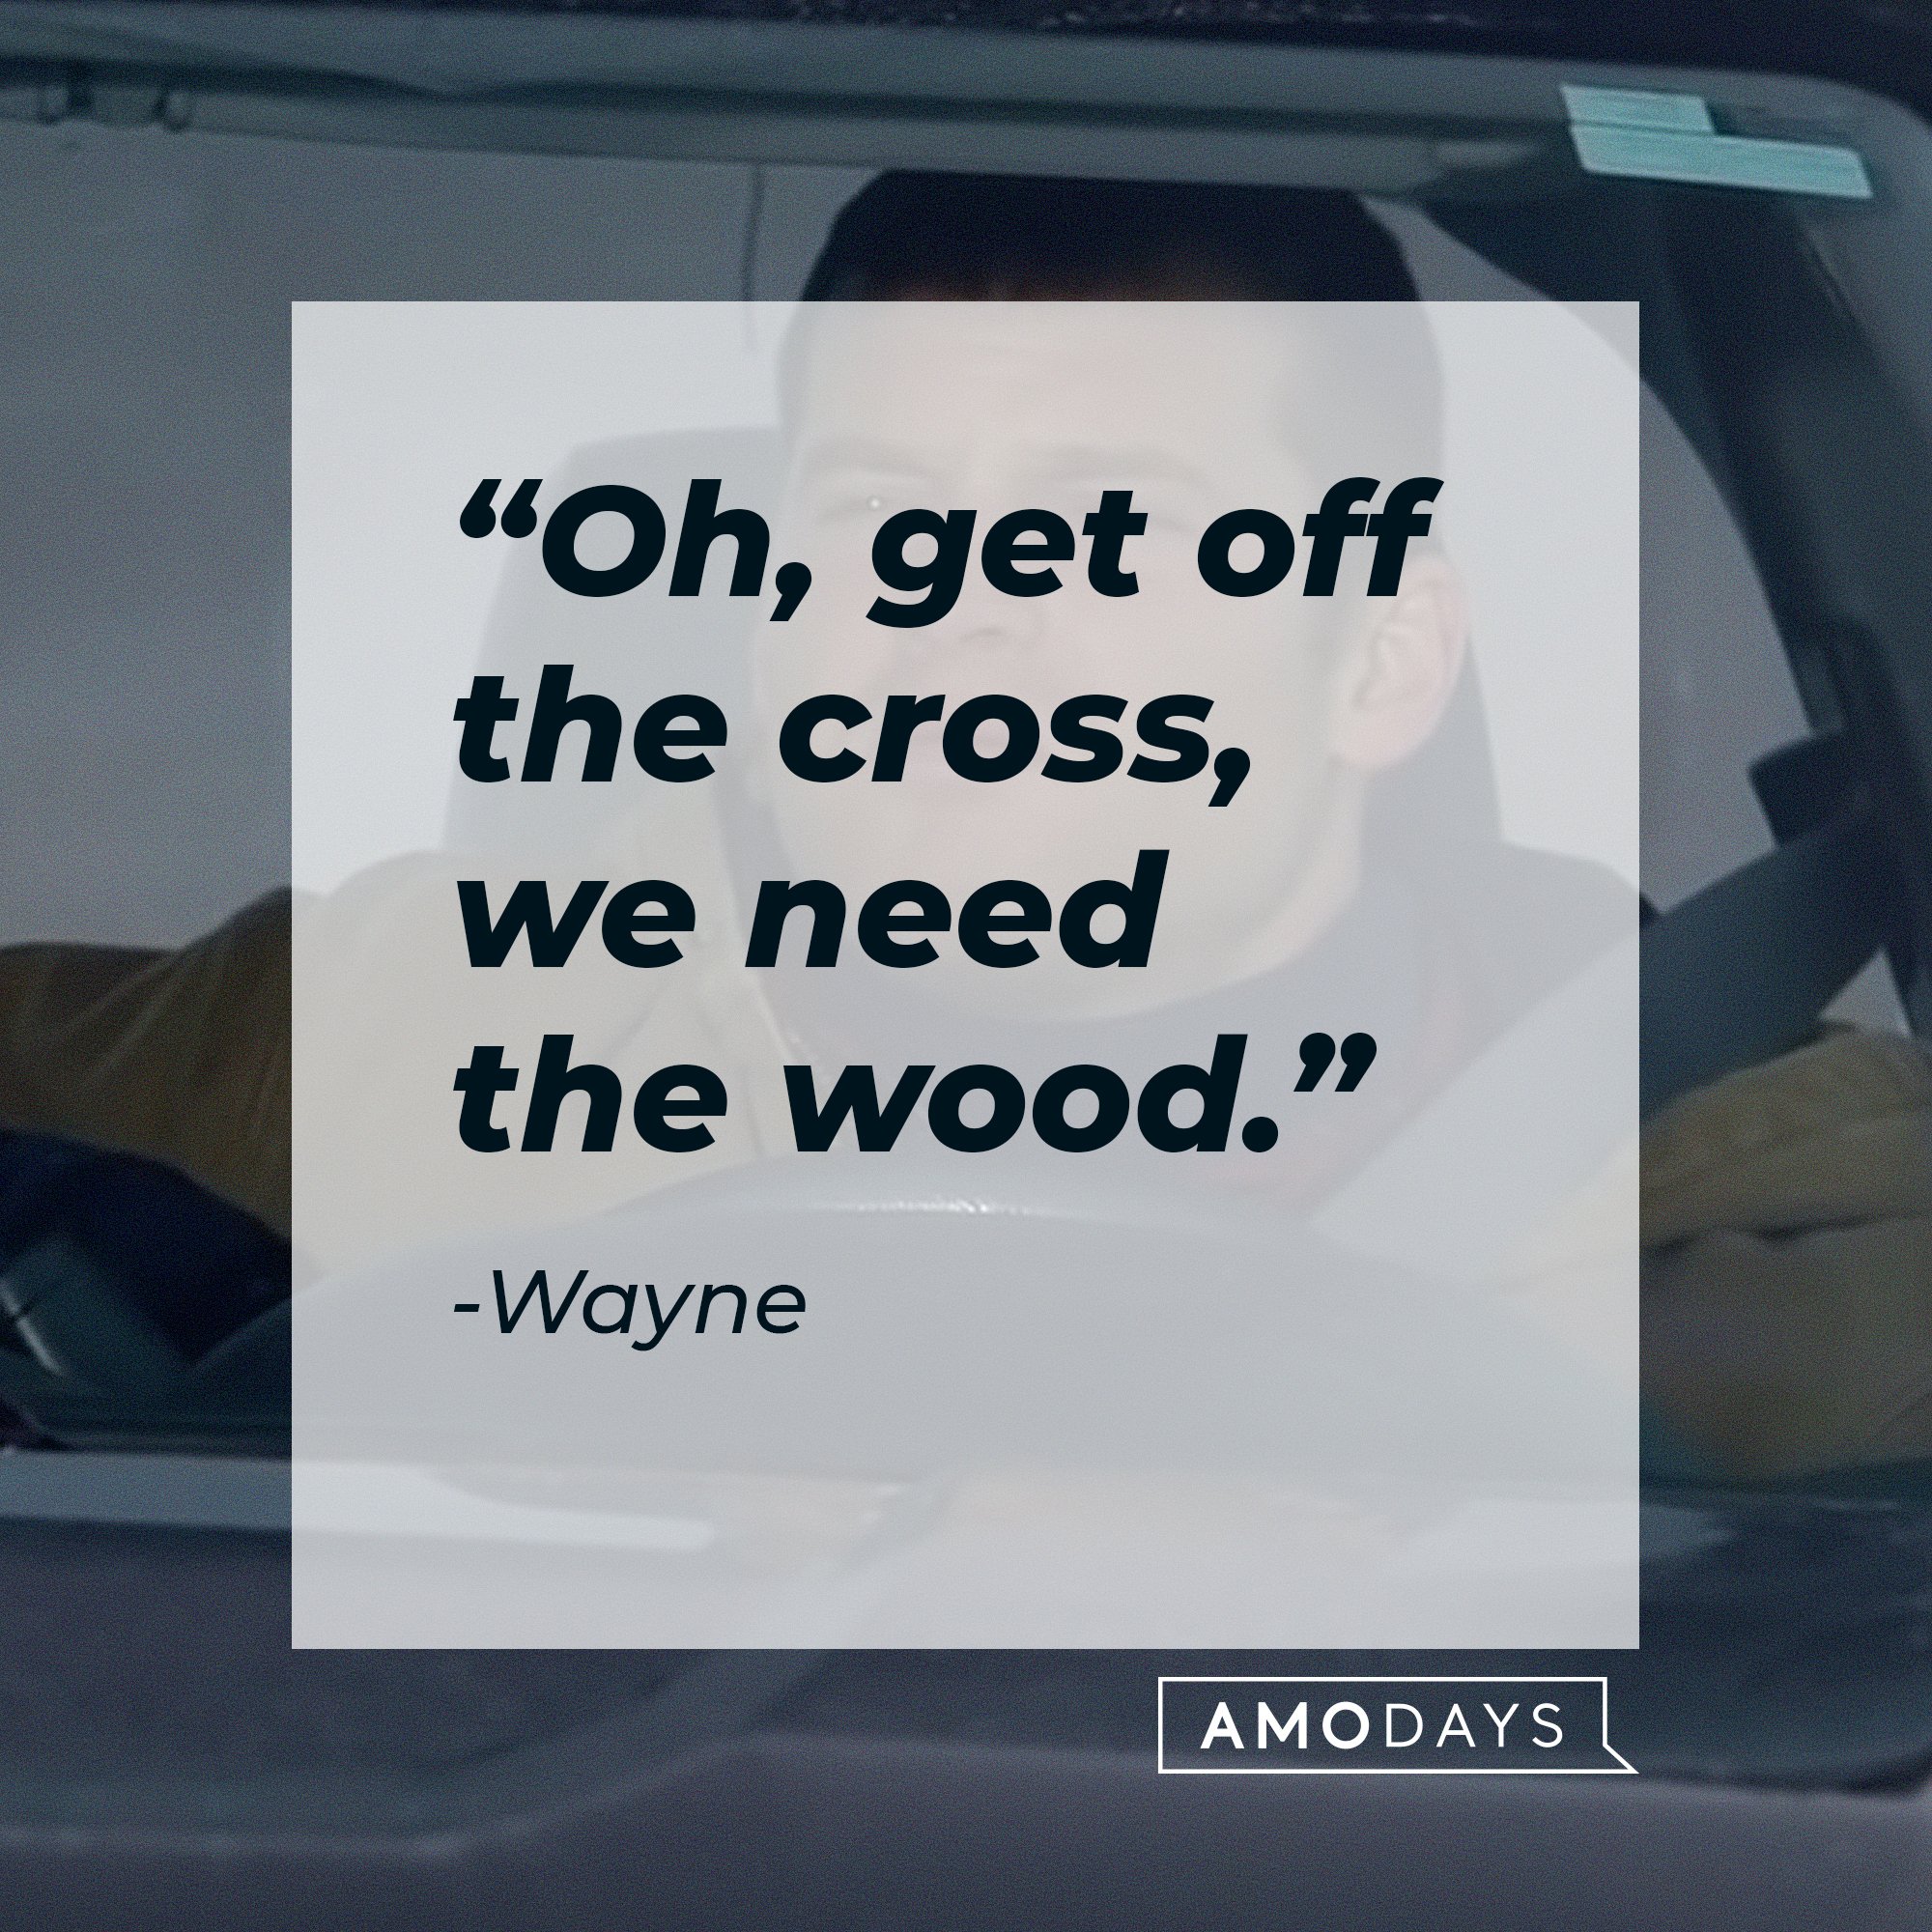 Wayne’s quote: “Oh, get off the cross, we need the wood.” | Image: AmoDays